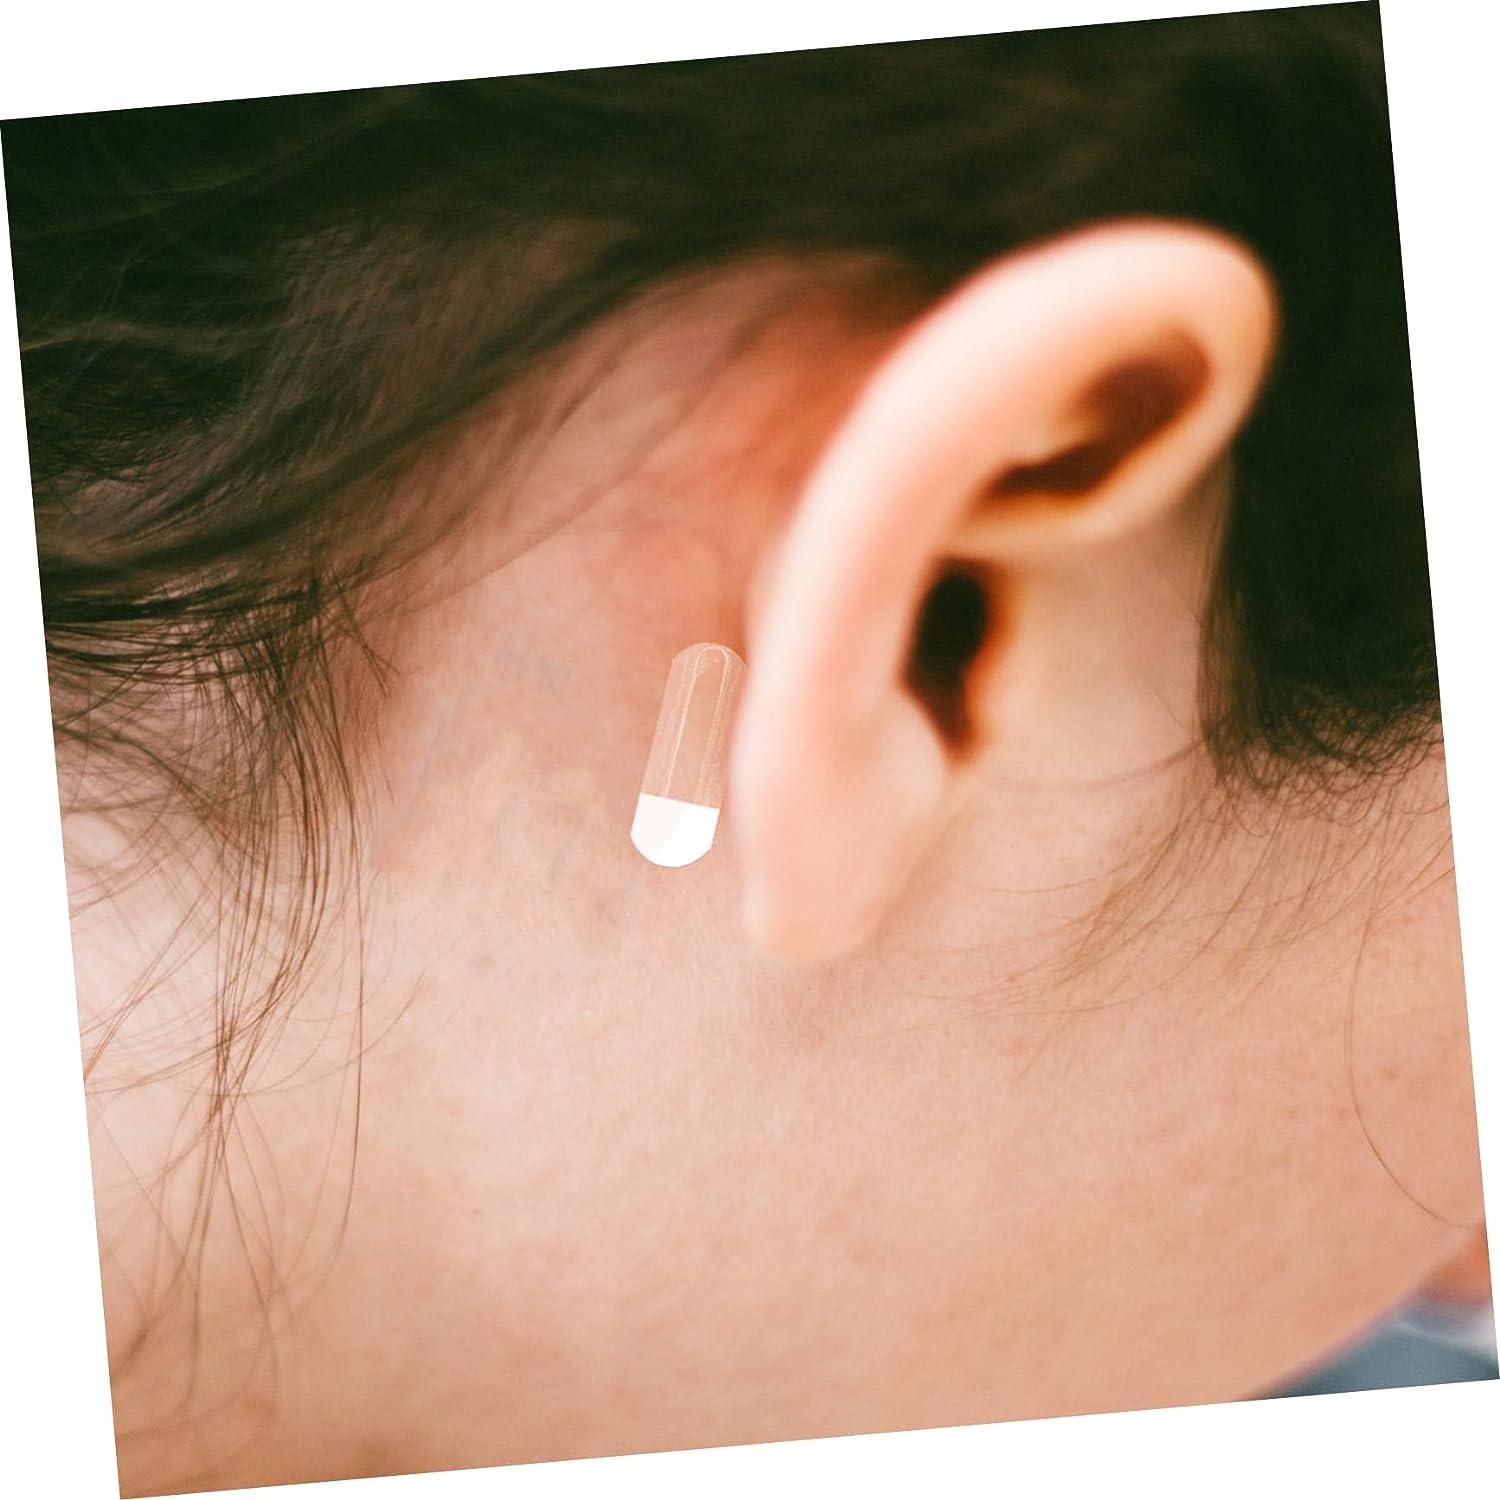 Elf Ear Tape 30Pcs Invisible Self-Adhesive Ear Stickers Waterproof